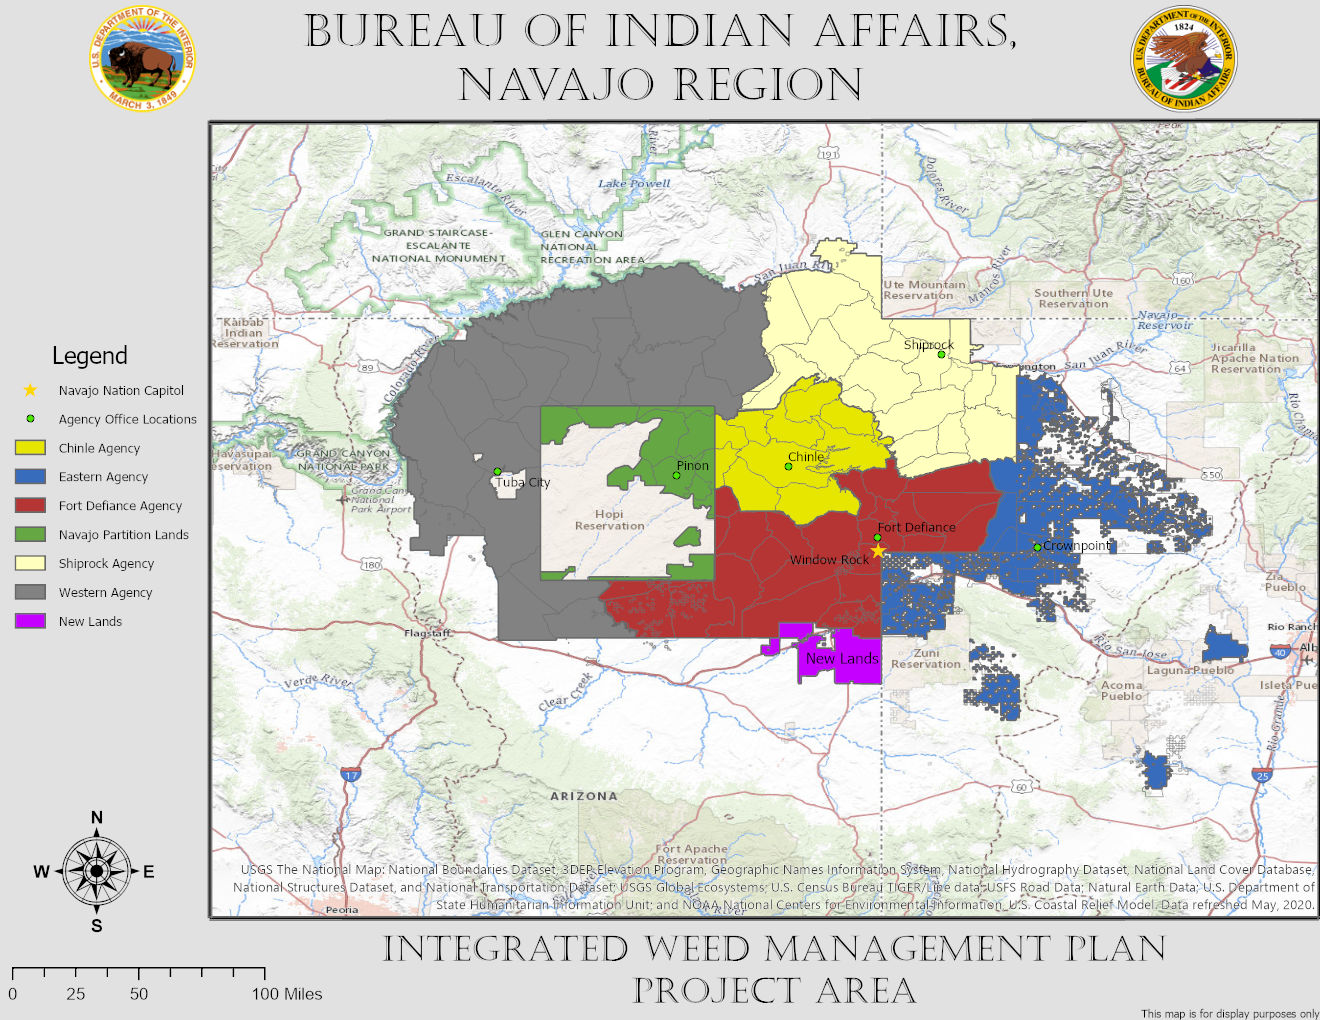 Map of the Navajo Nation lands administered by the Bureau of Indian Affairs. The Navajo Nation is divided by Agency, with Western Agency in gray, Shiprock Agency in tan, Eastern Agency in blue, Chinle Agency in bright yellow, Fort Defiance Agency in red, Navajo Partitioned Lands in green, and New Lands in magenta. 